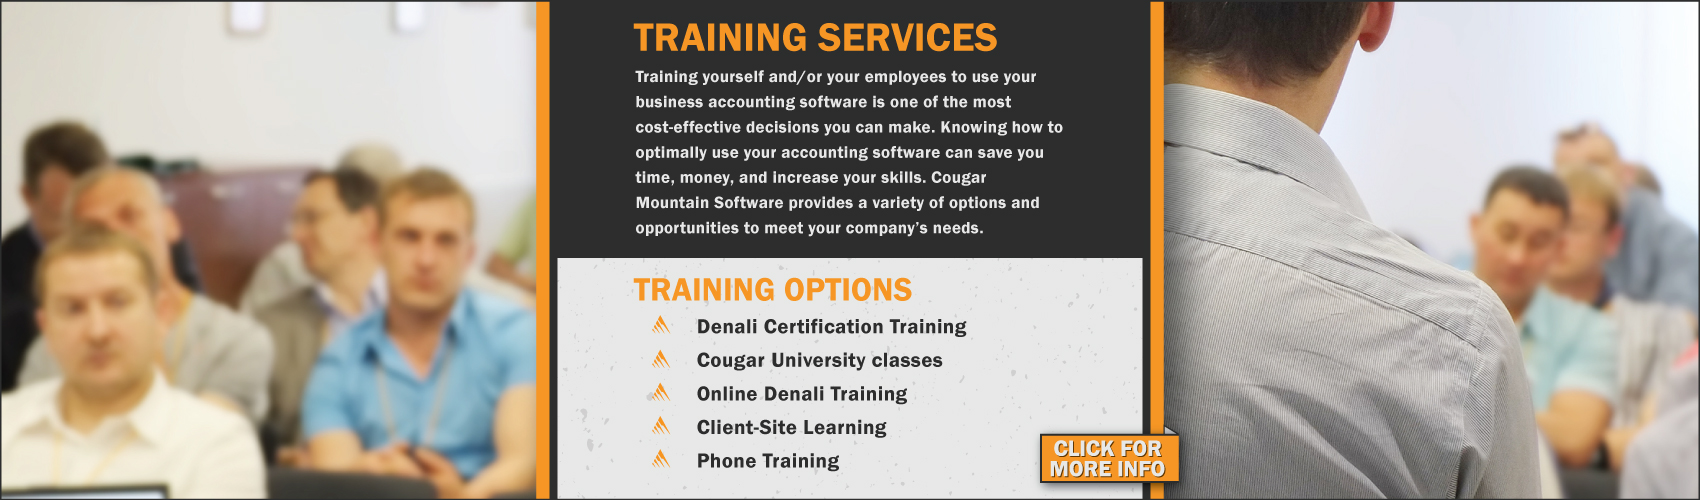 Training Services